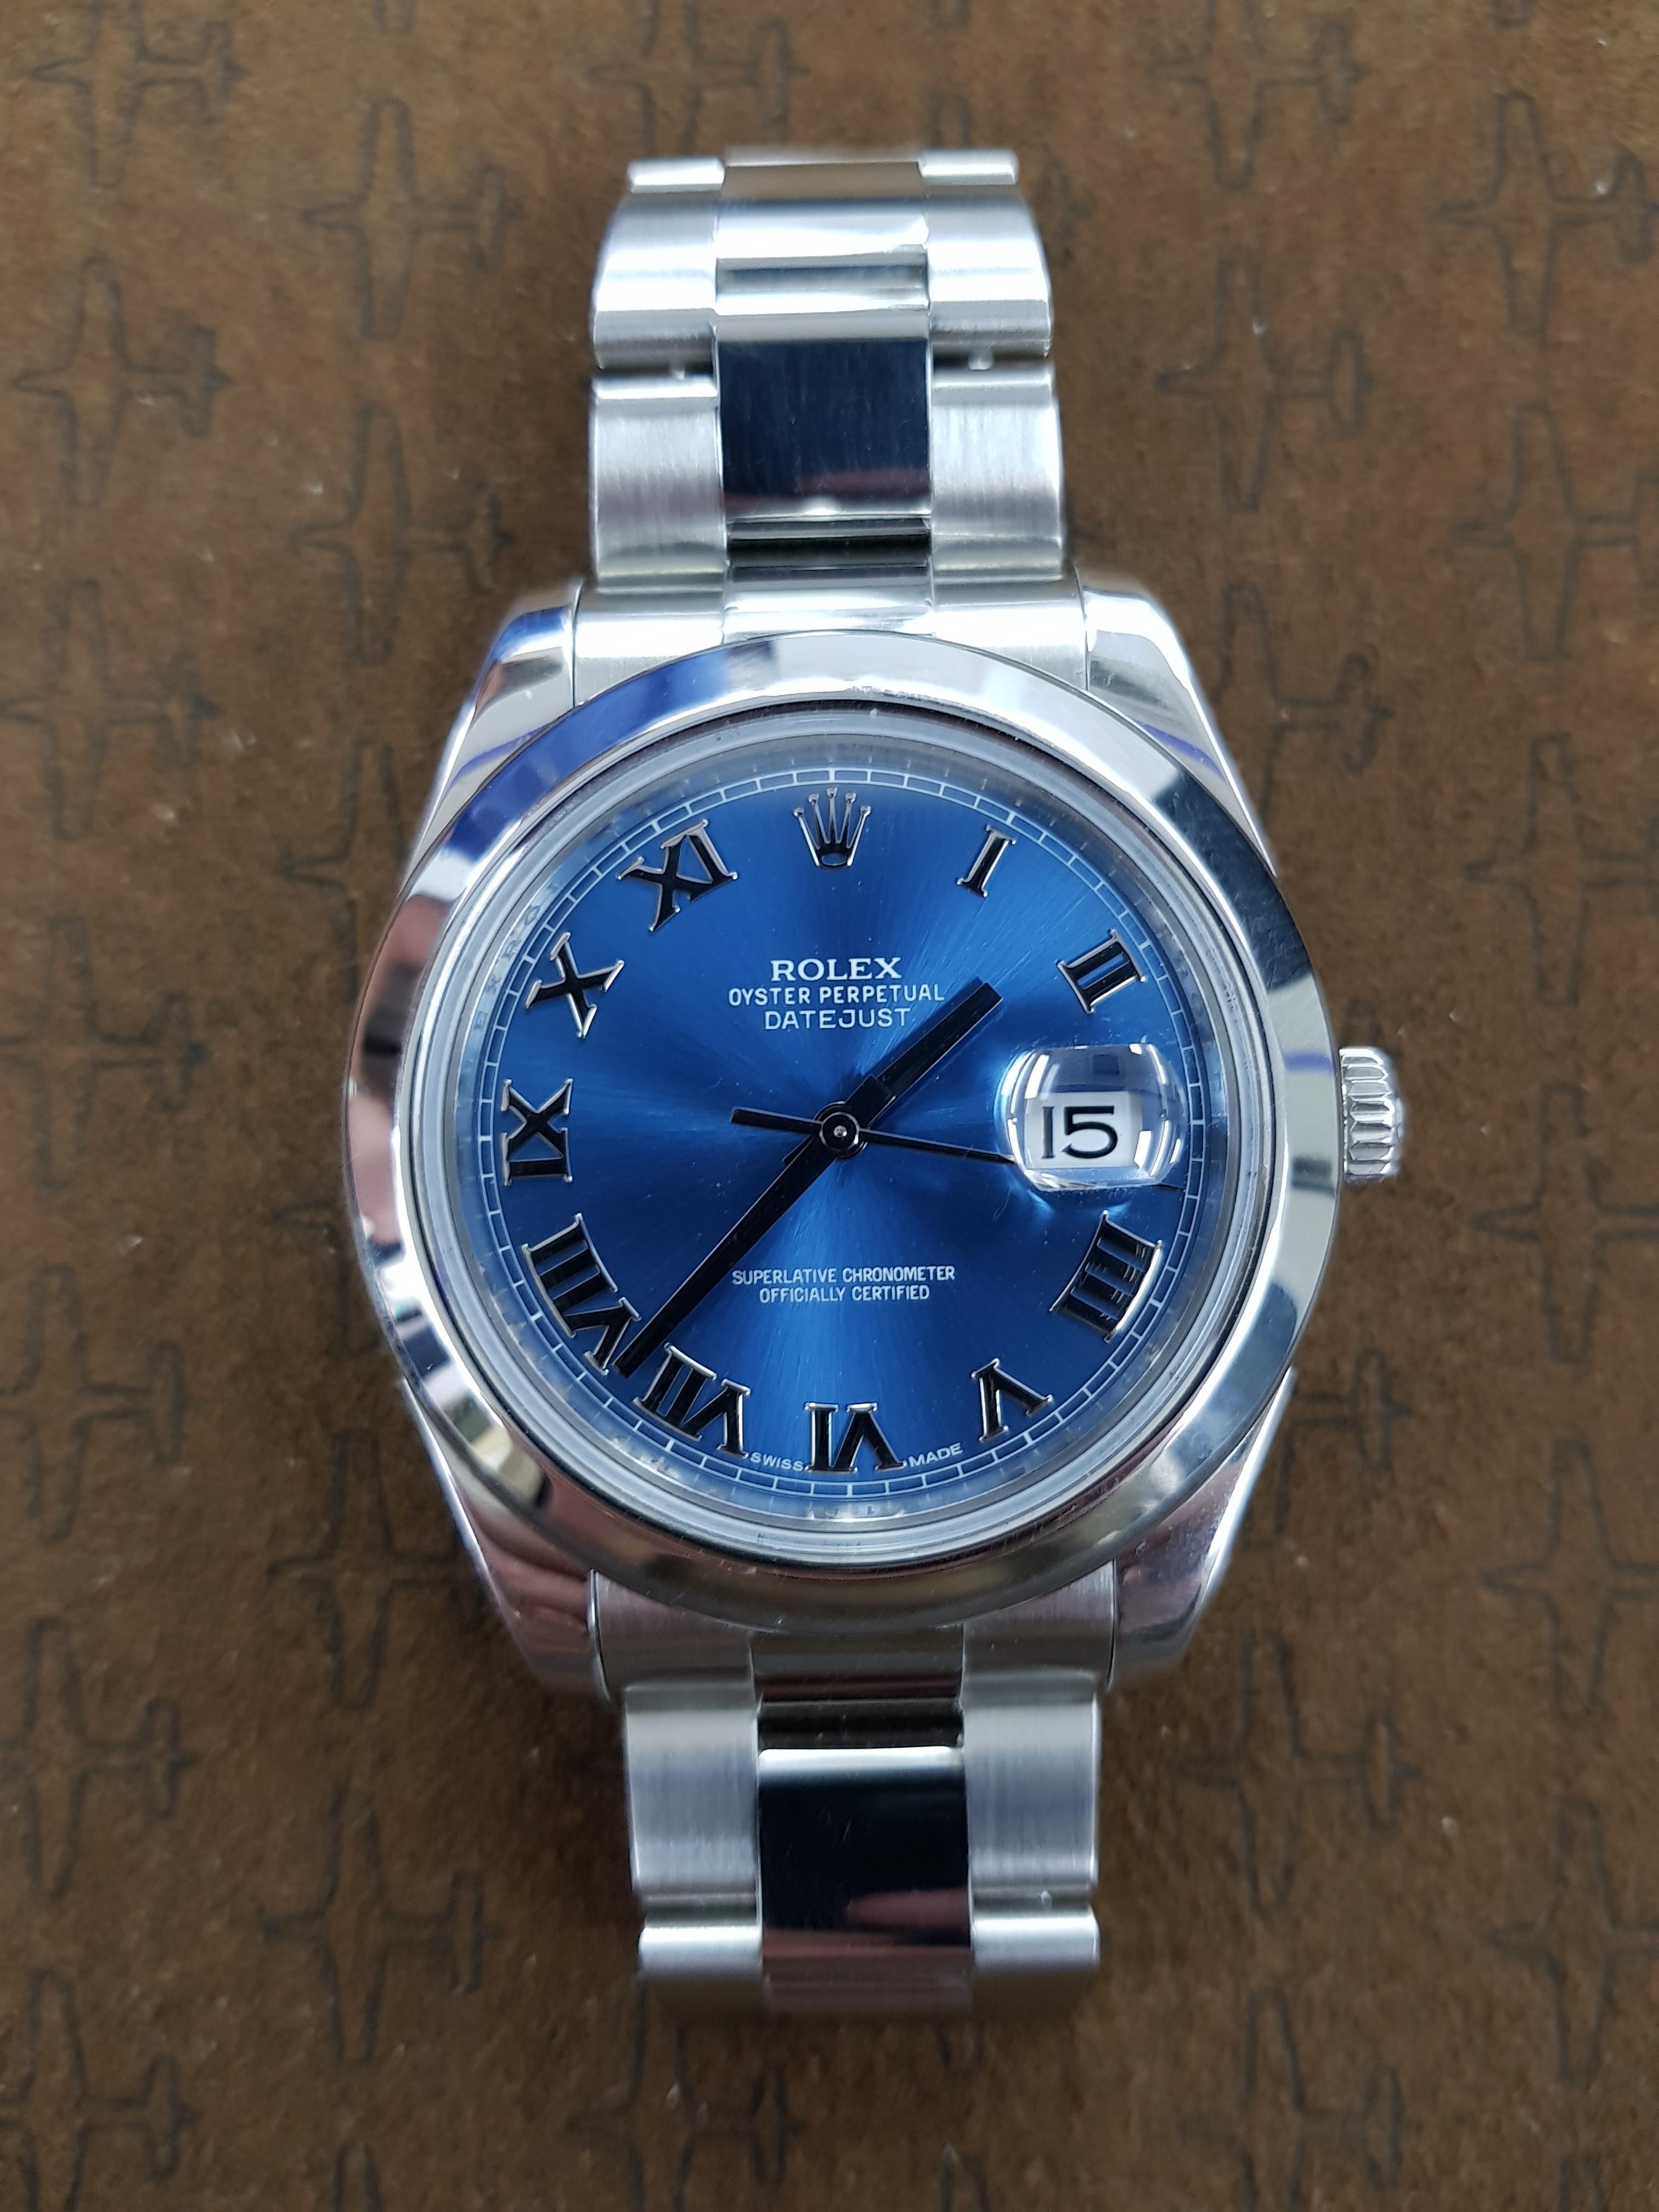 Rolex Date Just 2 in stainless steel with a 41 mm blue dial. This watch comes with full Rolex certification.